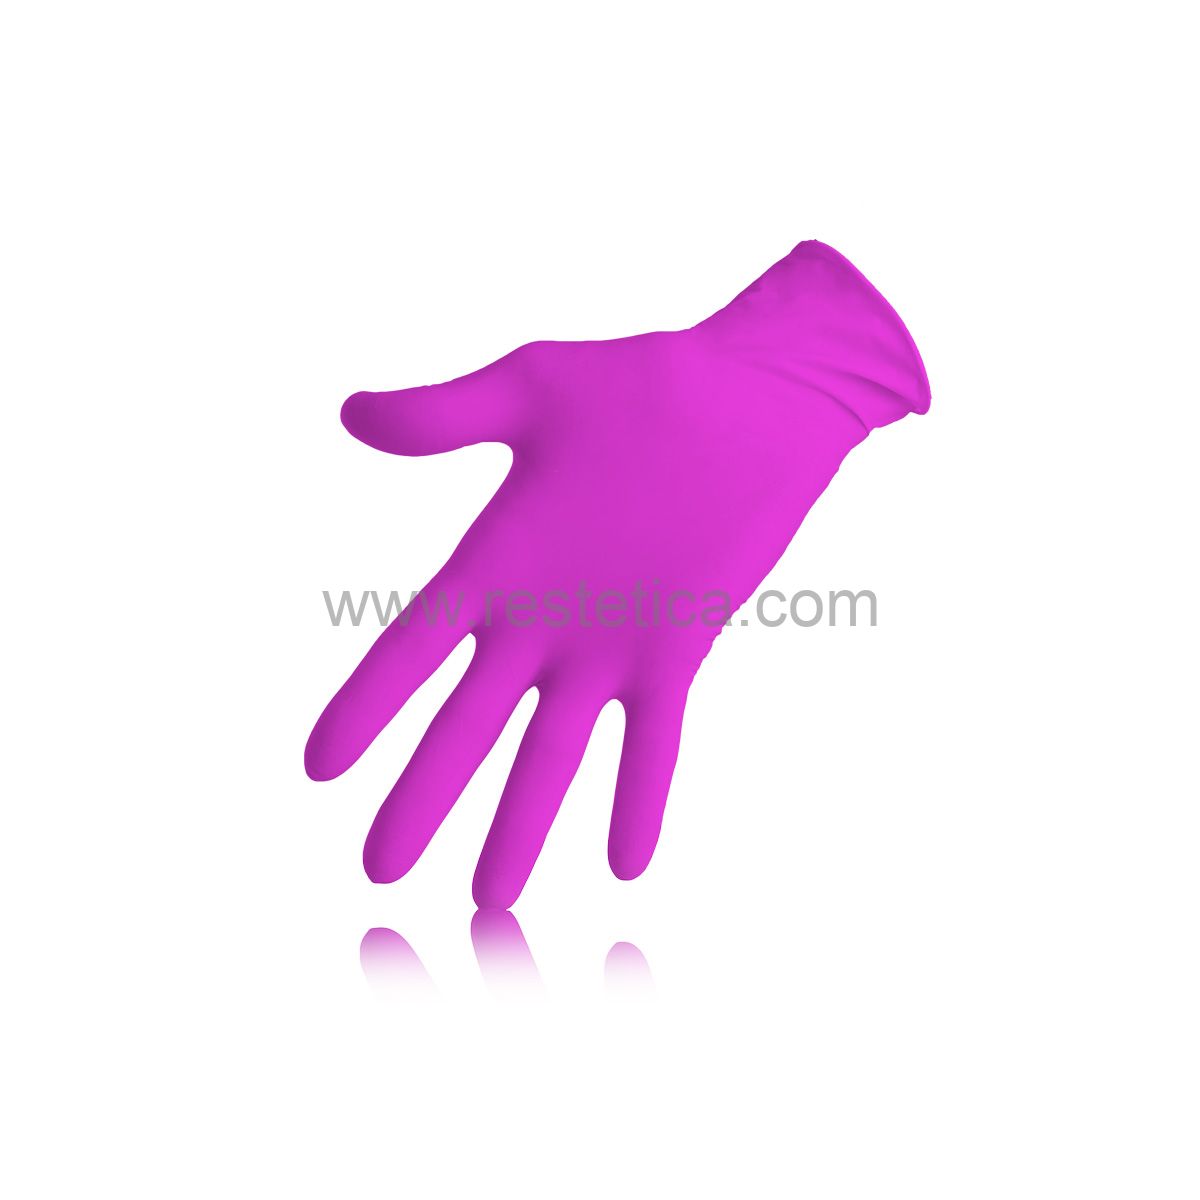 Categories :: MONOUSO e TNT :: Guanti e mascherine :: Disposable gloves in  magenta color in nitrile and without talc - Size M box 100PCS